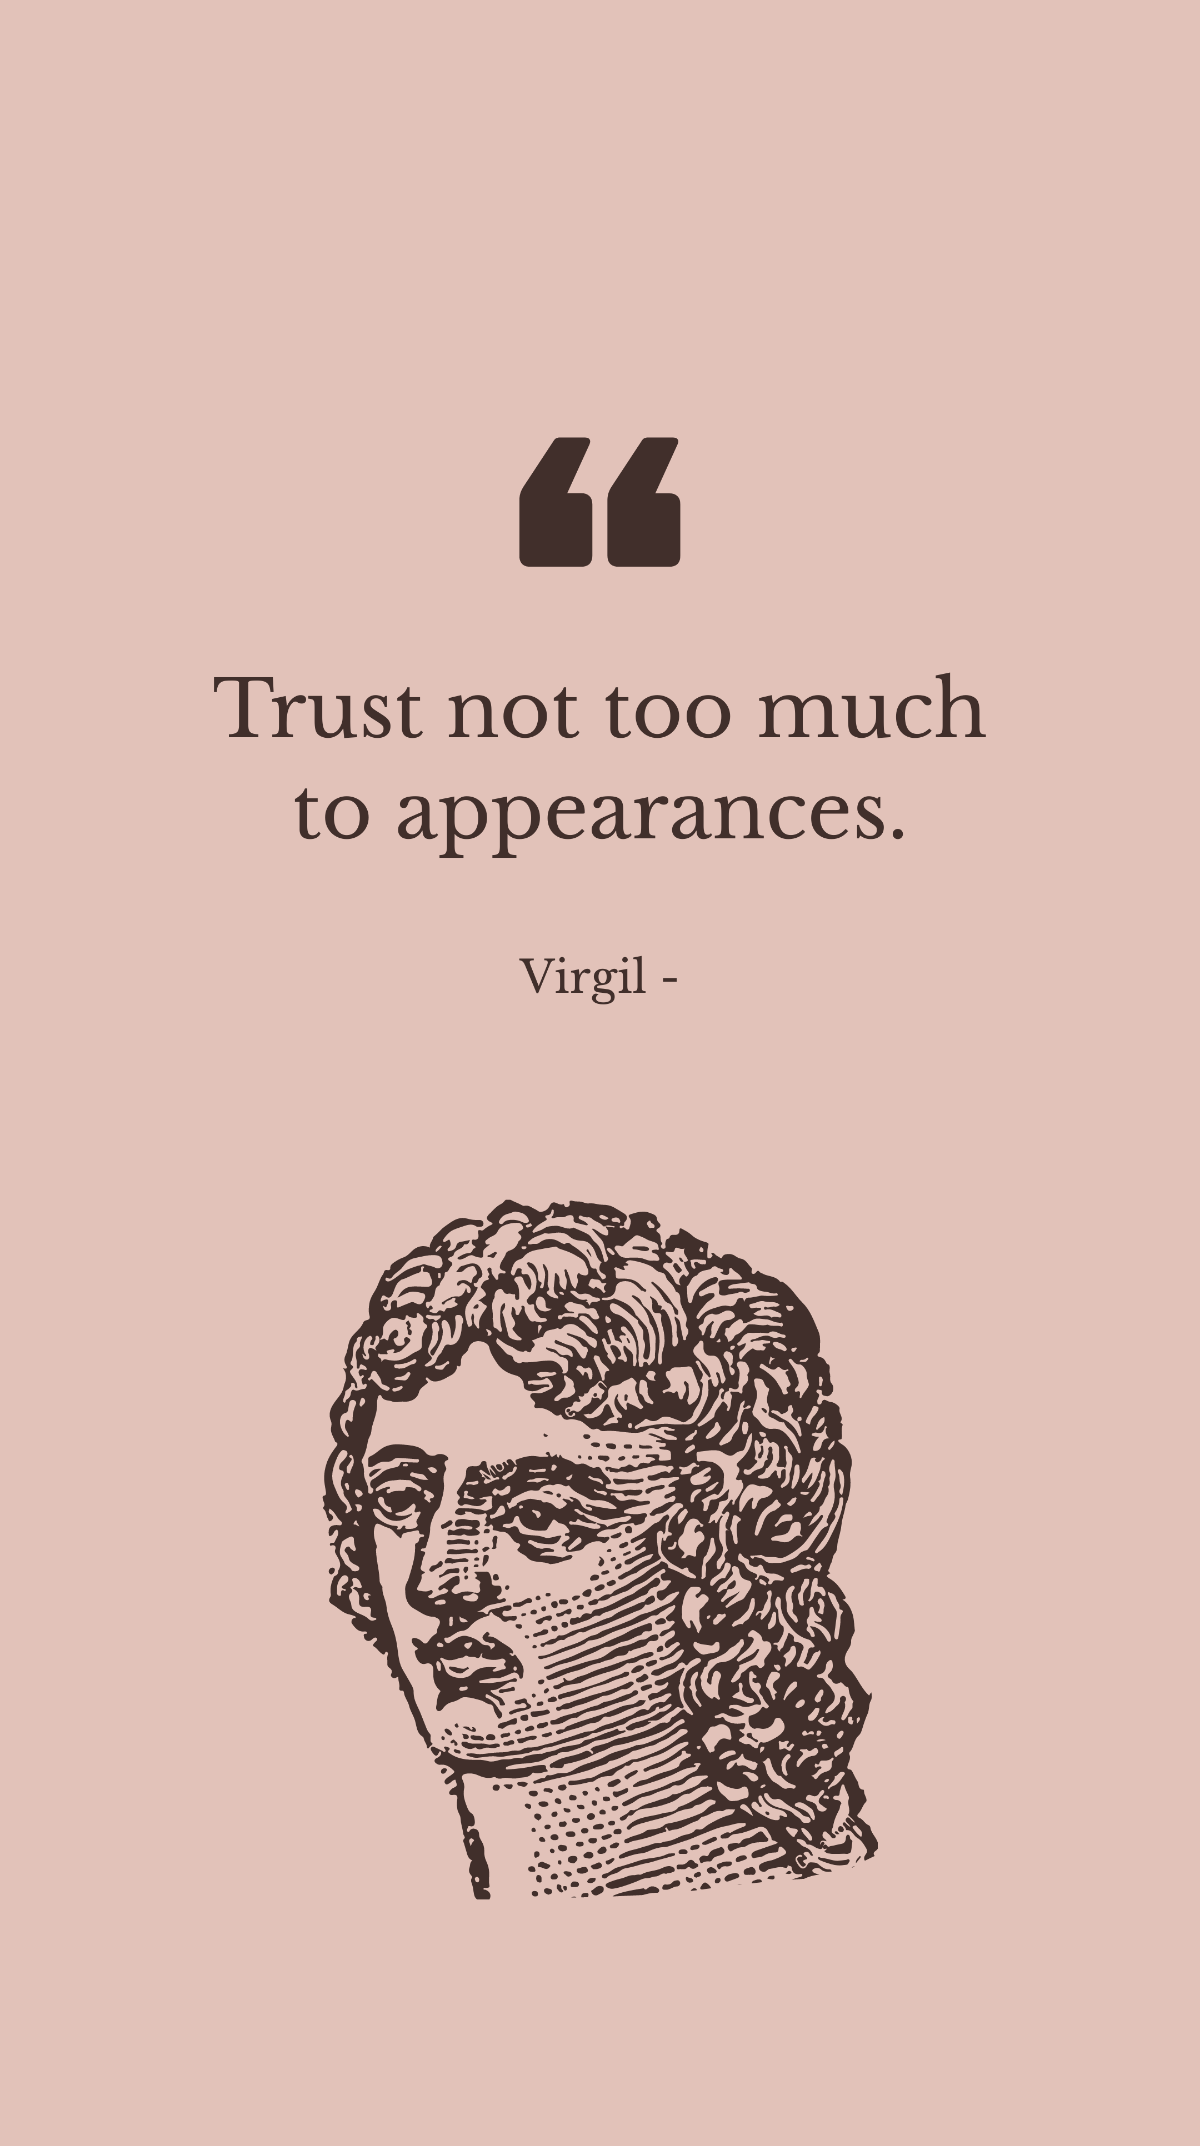 Virgil - Trust not too much to appearances. Template